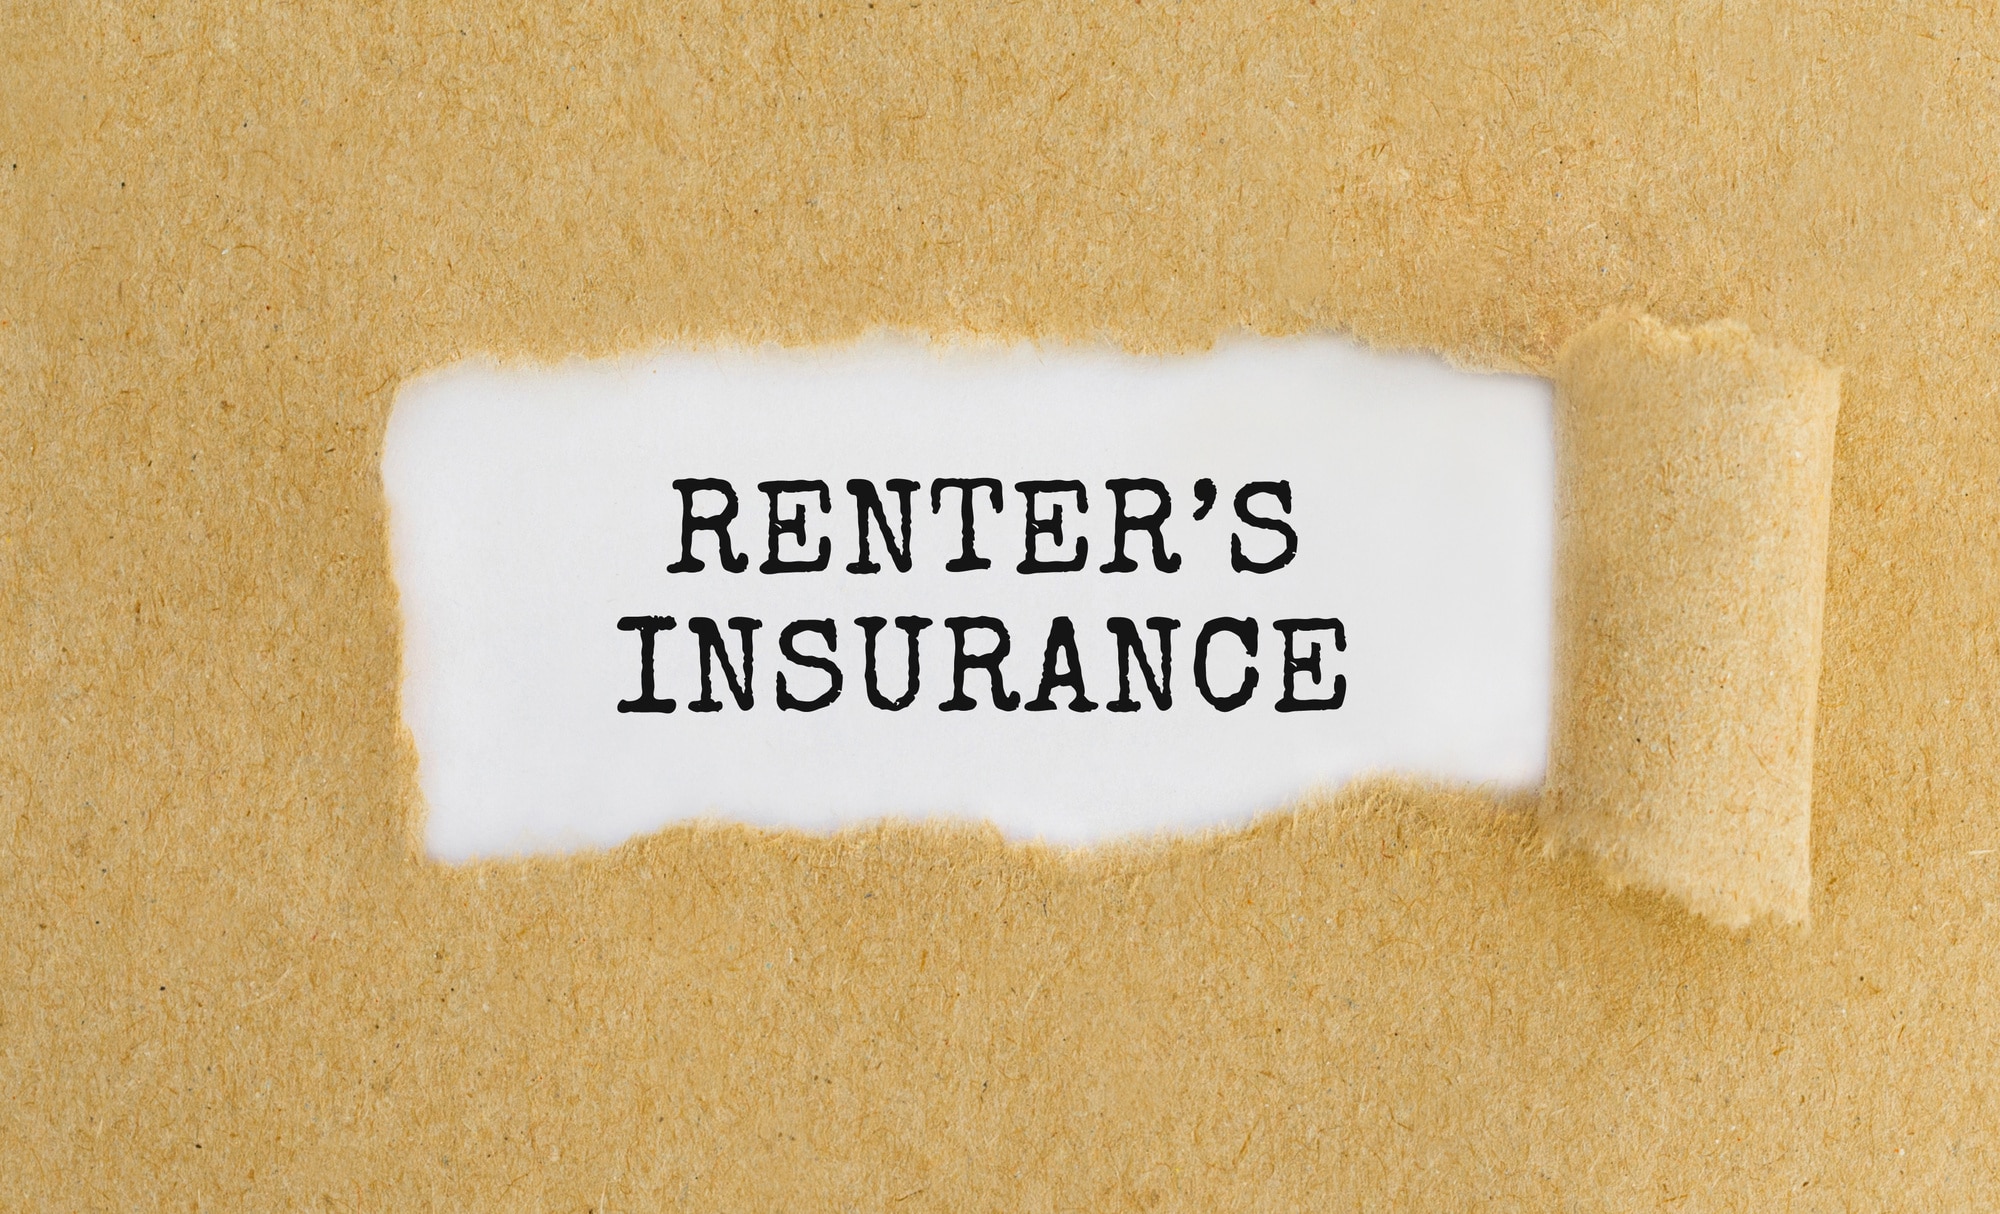 Affordable Renters Insurance California in 2022